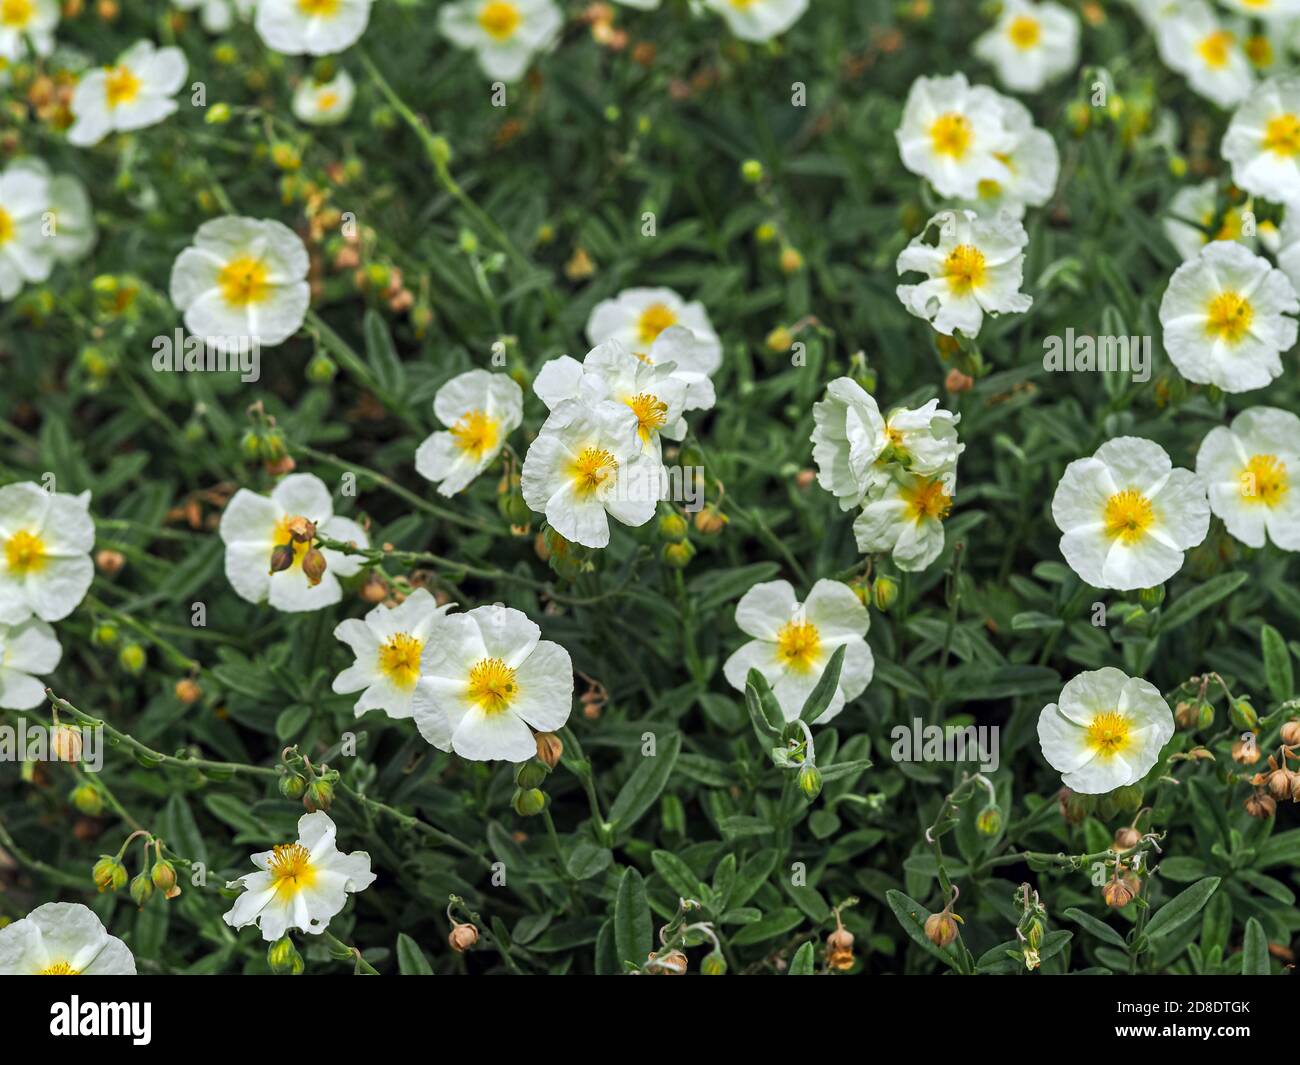 Pretty white flowers of a Helianthemum rock rose plant in a garden, variety The Bride Stock Photo